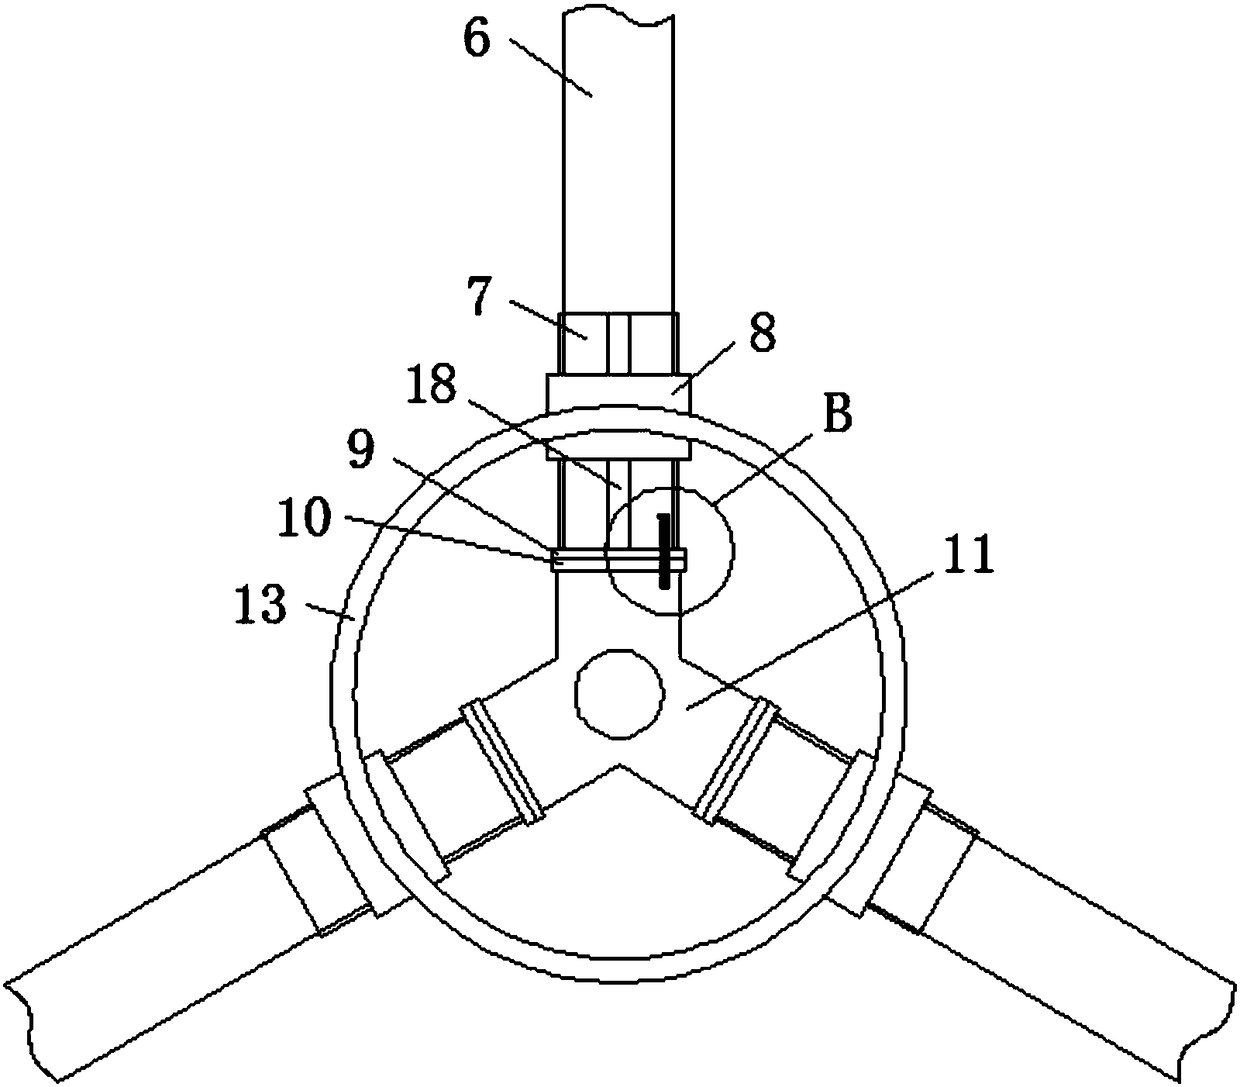 Rapid positioning type mounting device for wind power generation blade